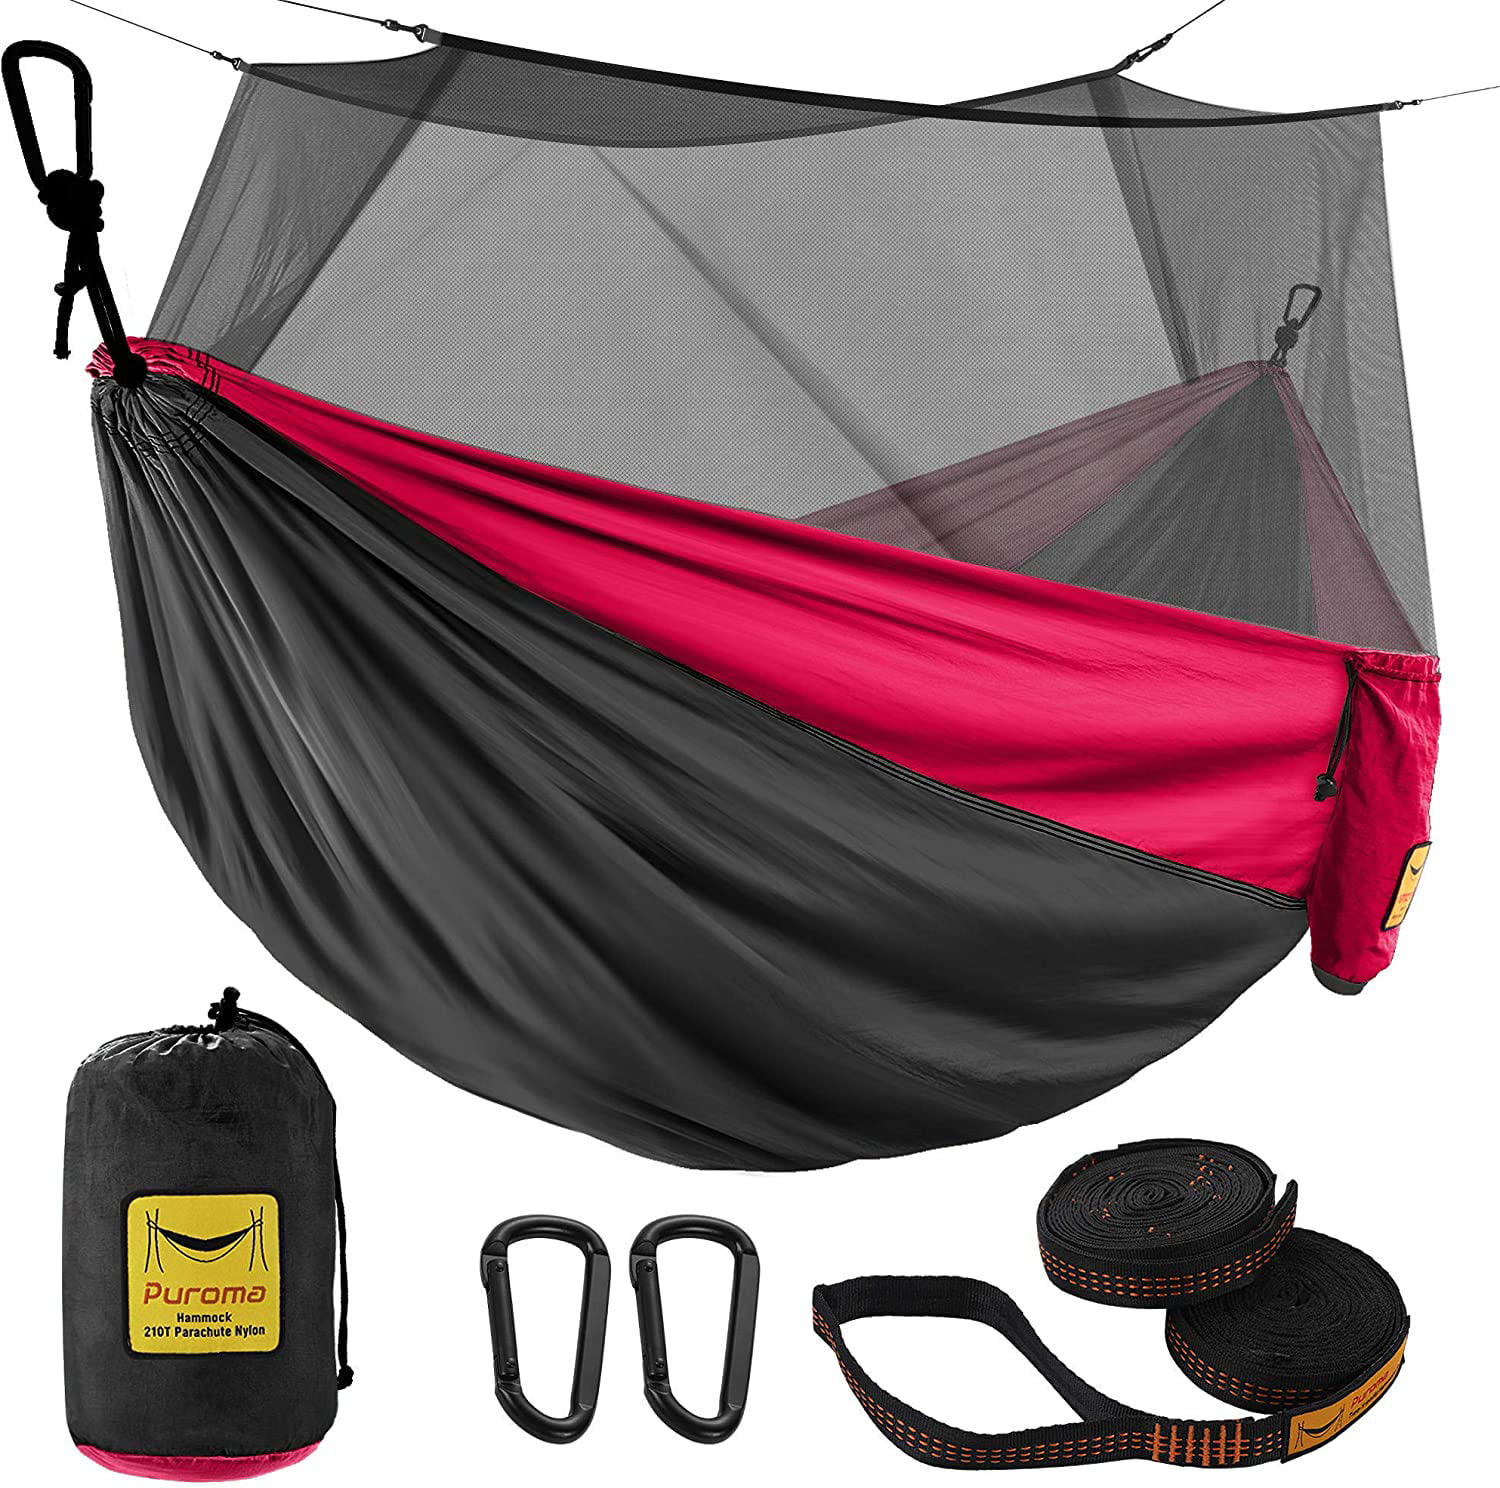 Lightweight & Portable Yet Heavy Duty with Straps Included for Easy Hanging from Trees Camping Hammock for Travel and Hiking Great Camping Gifts for Men & Women Single & Double Outdoor Hammock